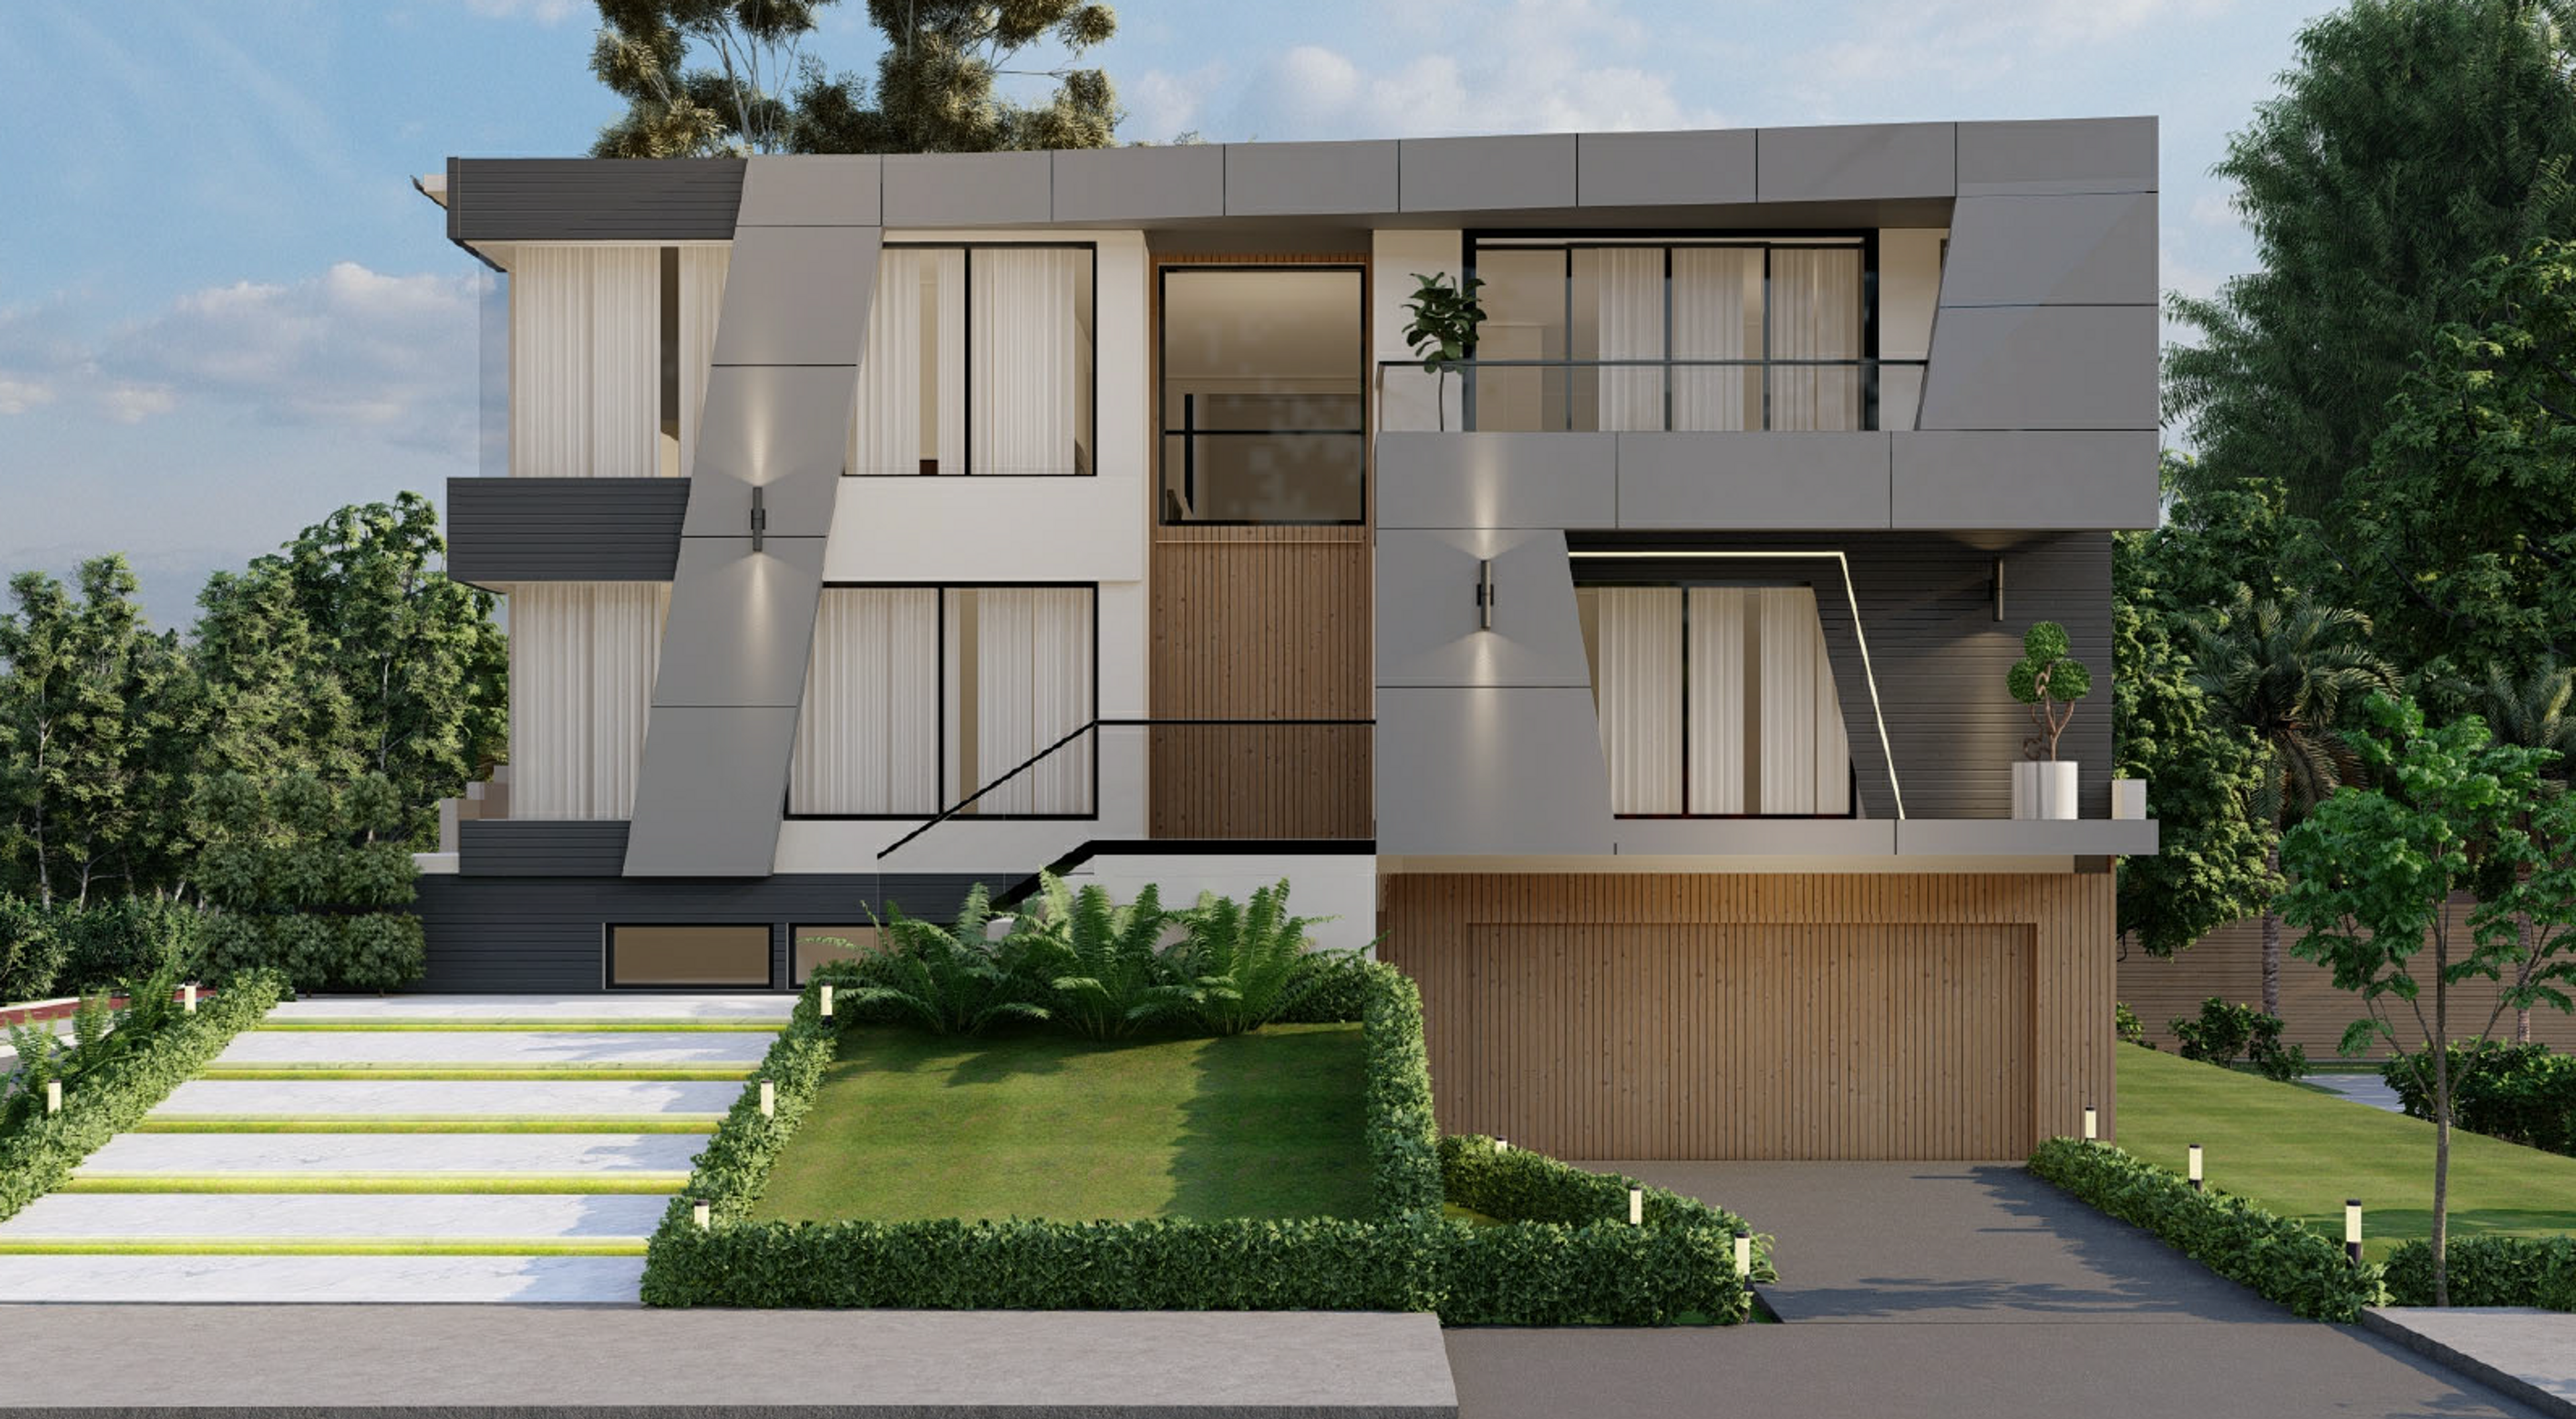 Dezire Homes build, three storey modern home with a striking facade